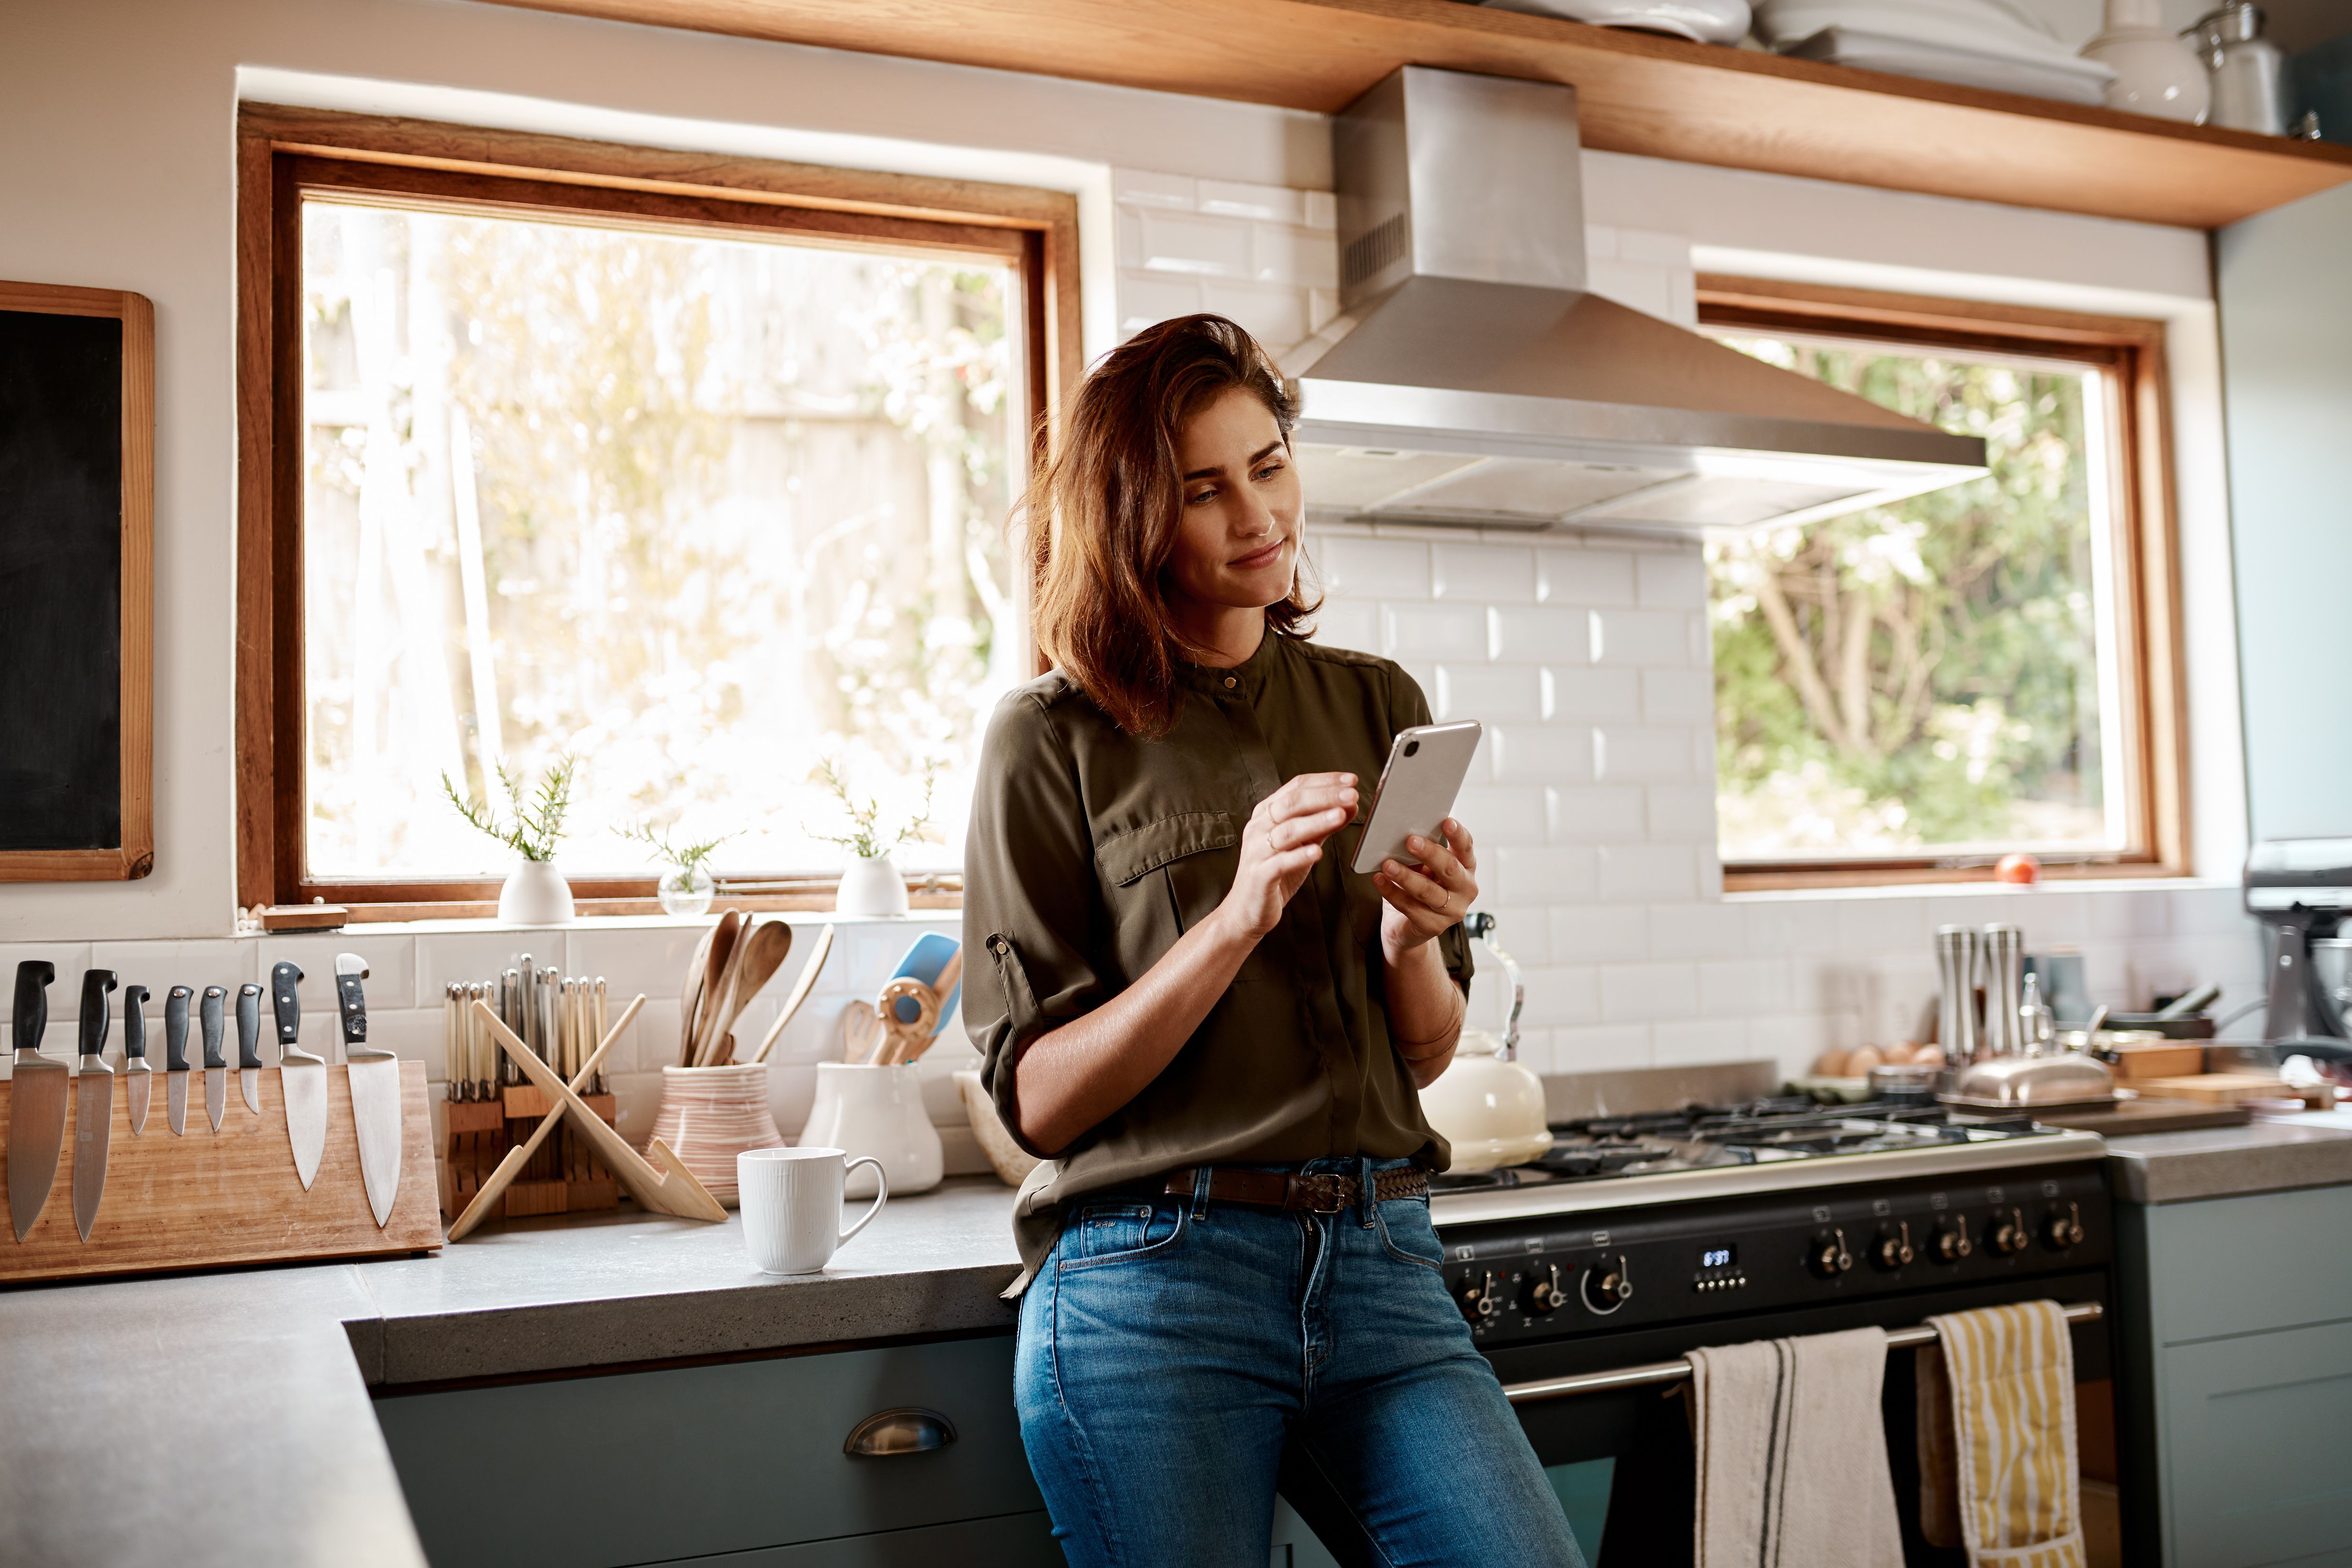 A person is on their mobile device, standing in their kitchen.